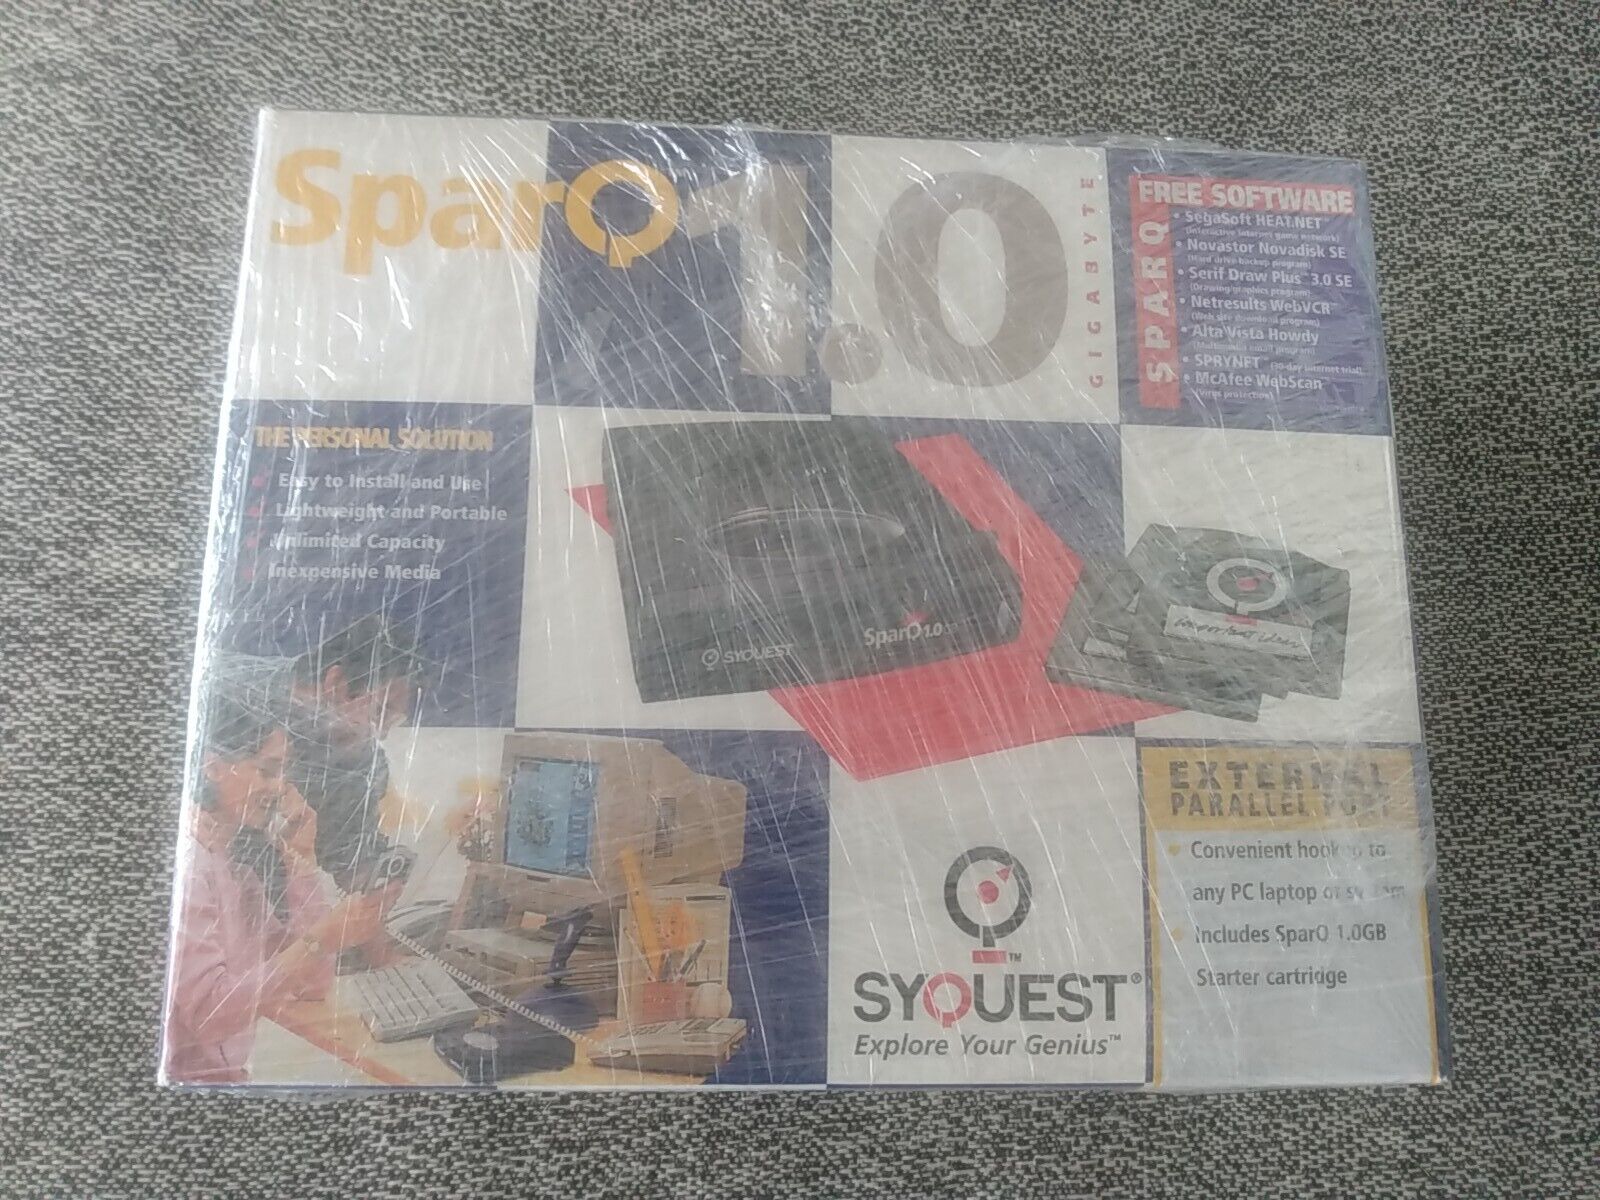 Vintage SyQuest SparQ 1.0 GB External Parallel Port Brand New Old Stock